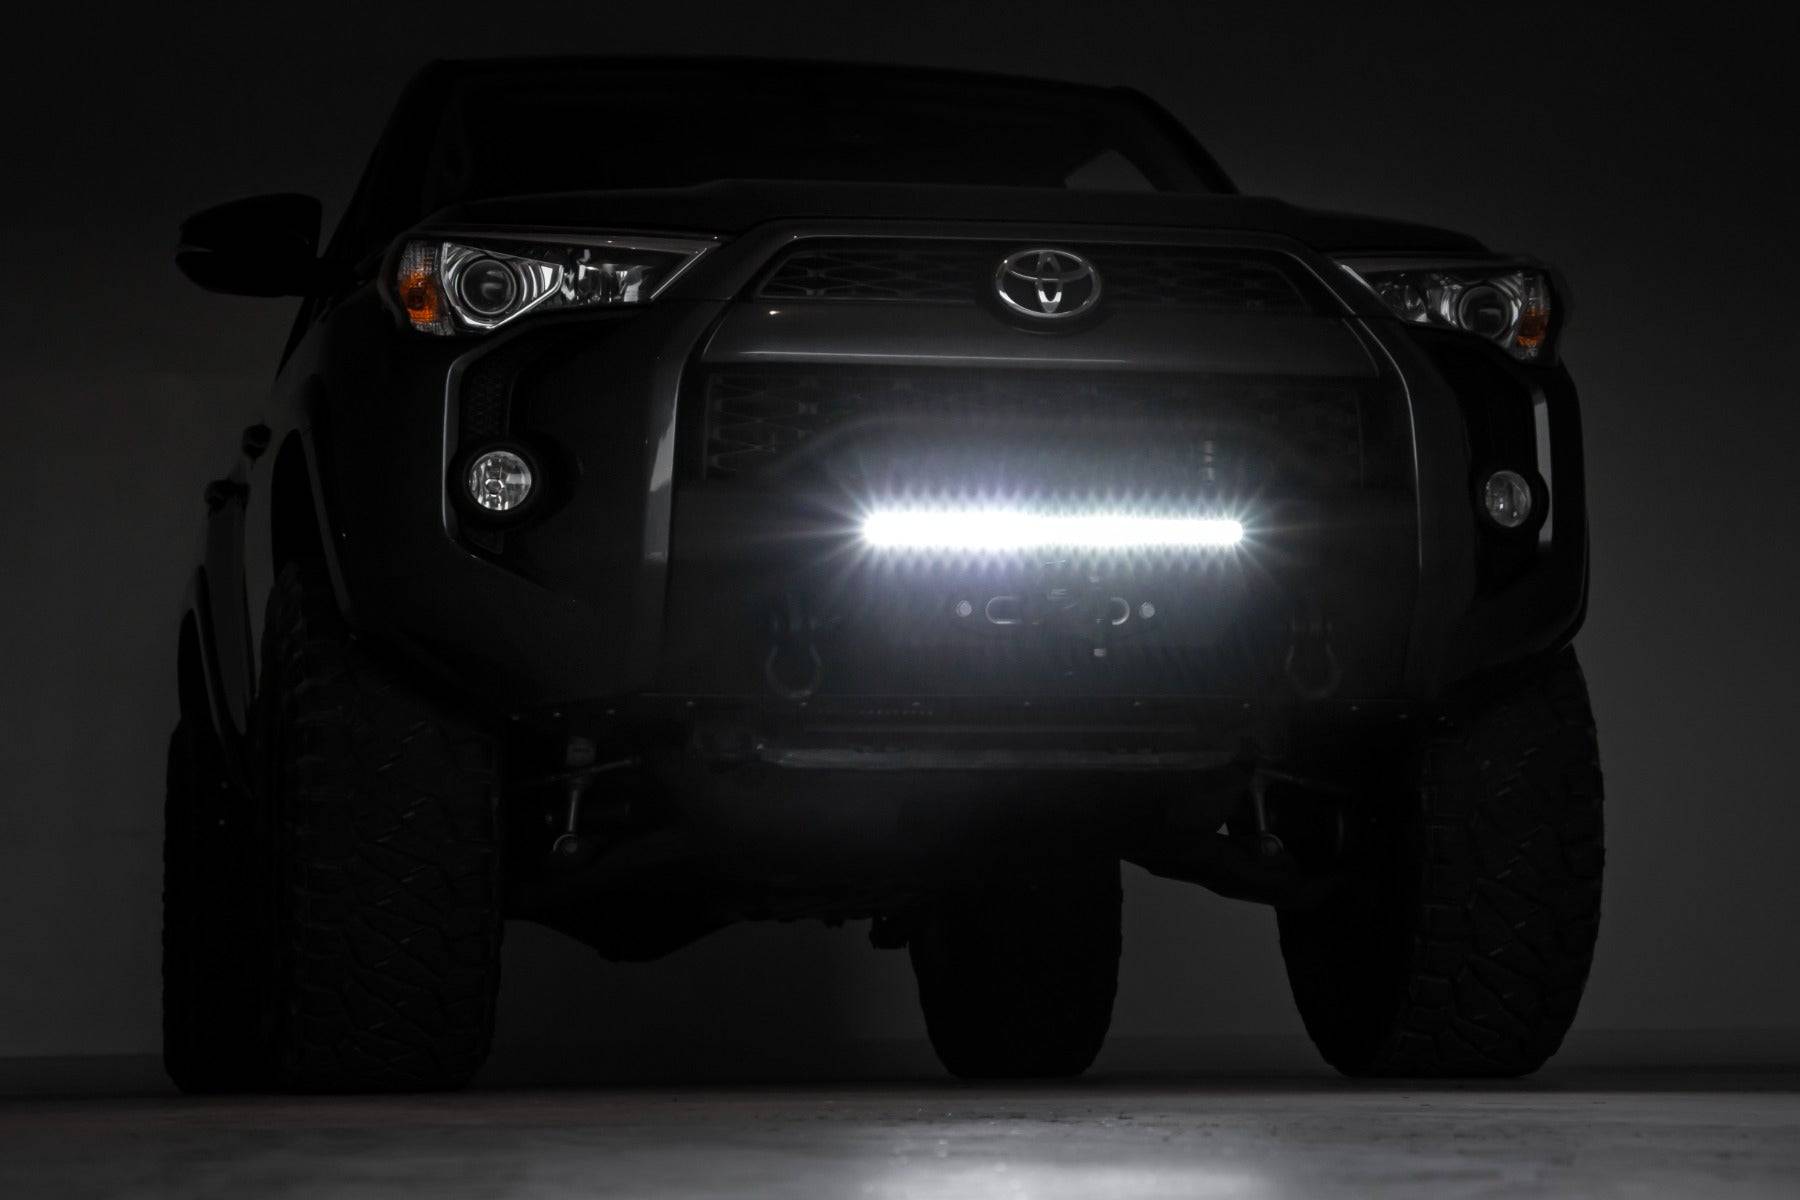 For 2010-2021 Toyota 4runner Front Bumper W/Winch Plate & Light